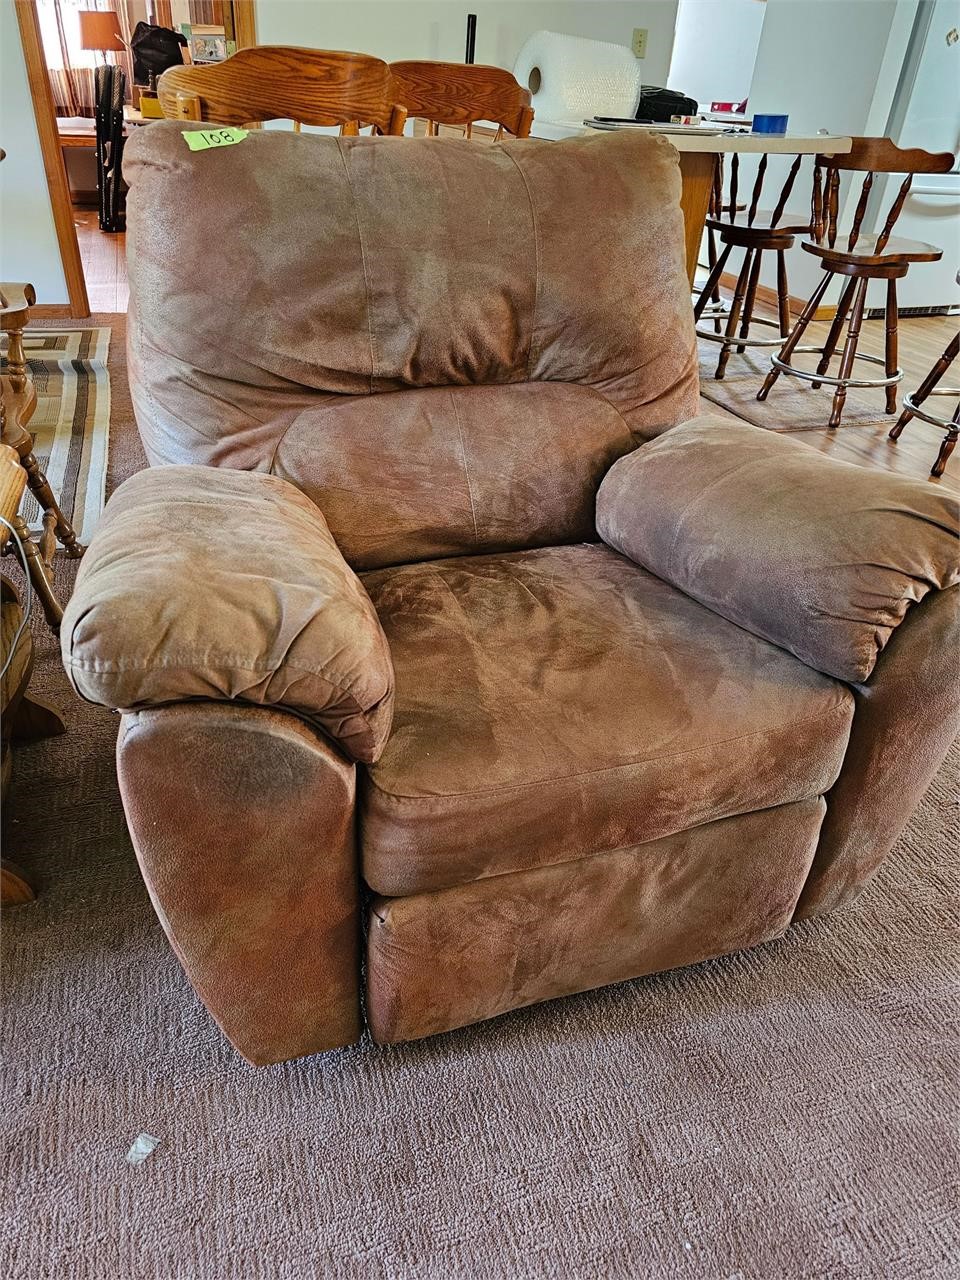 Cushioned recliner